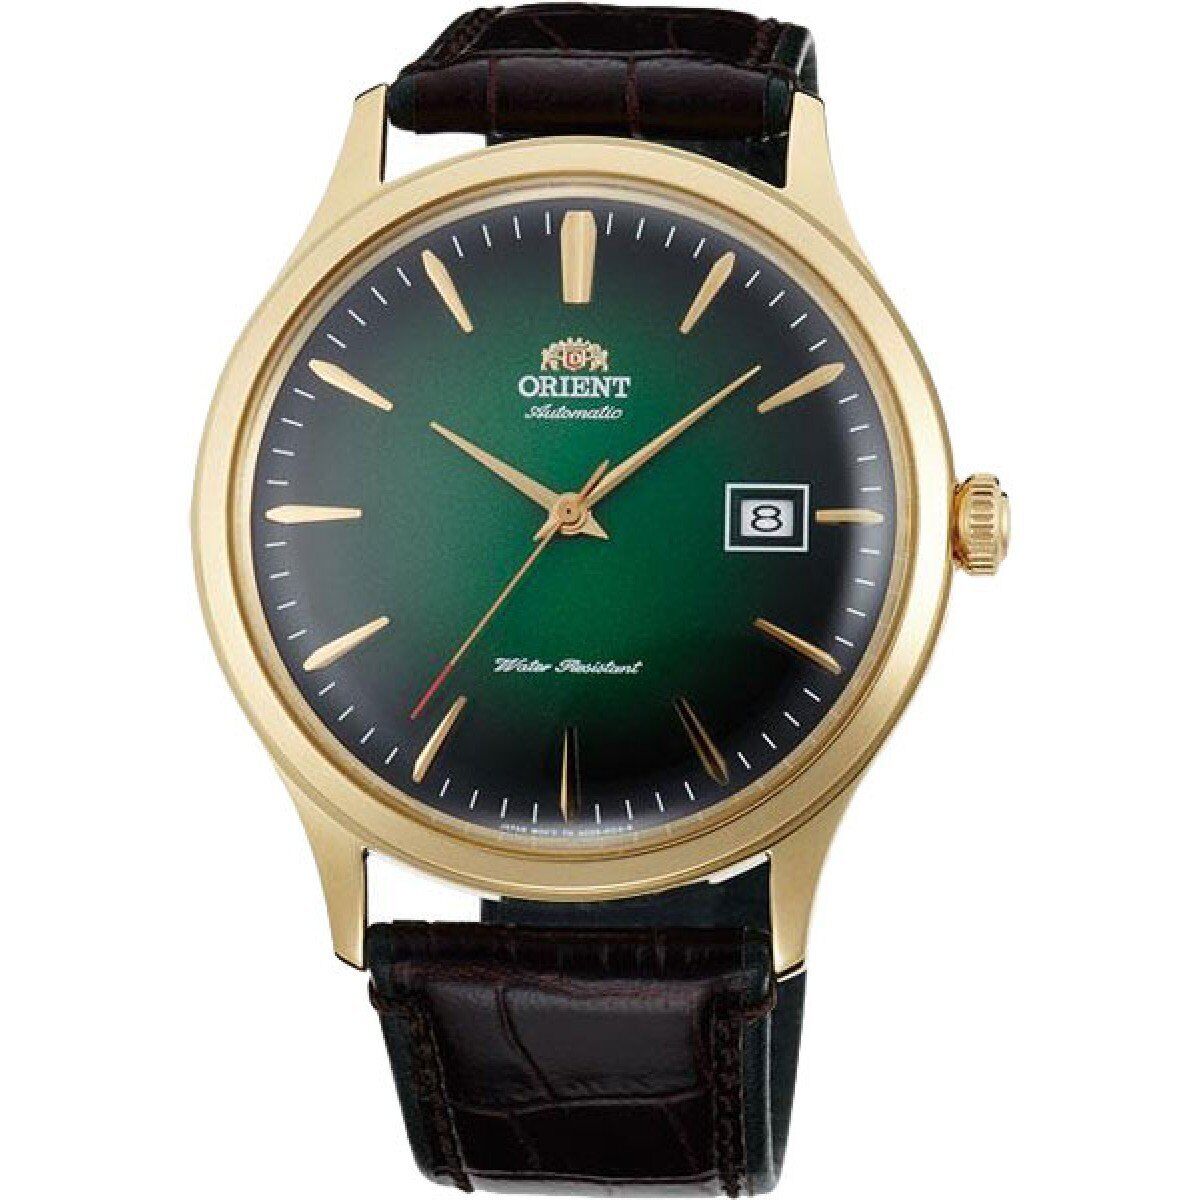 ORIENT Bambino Automatic Watch Mechanical Automatic Round Green Stainless Steel